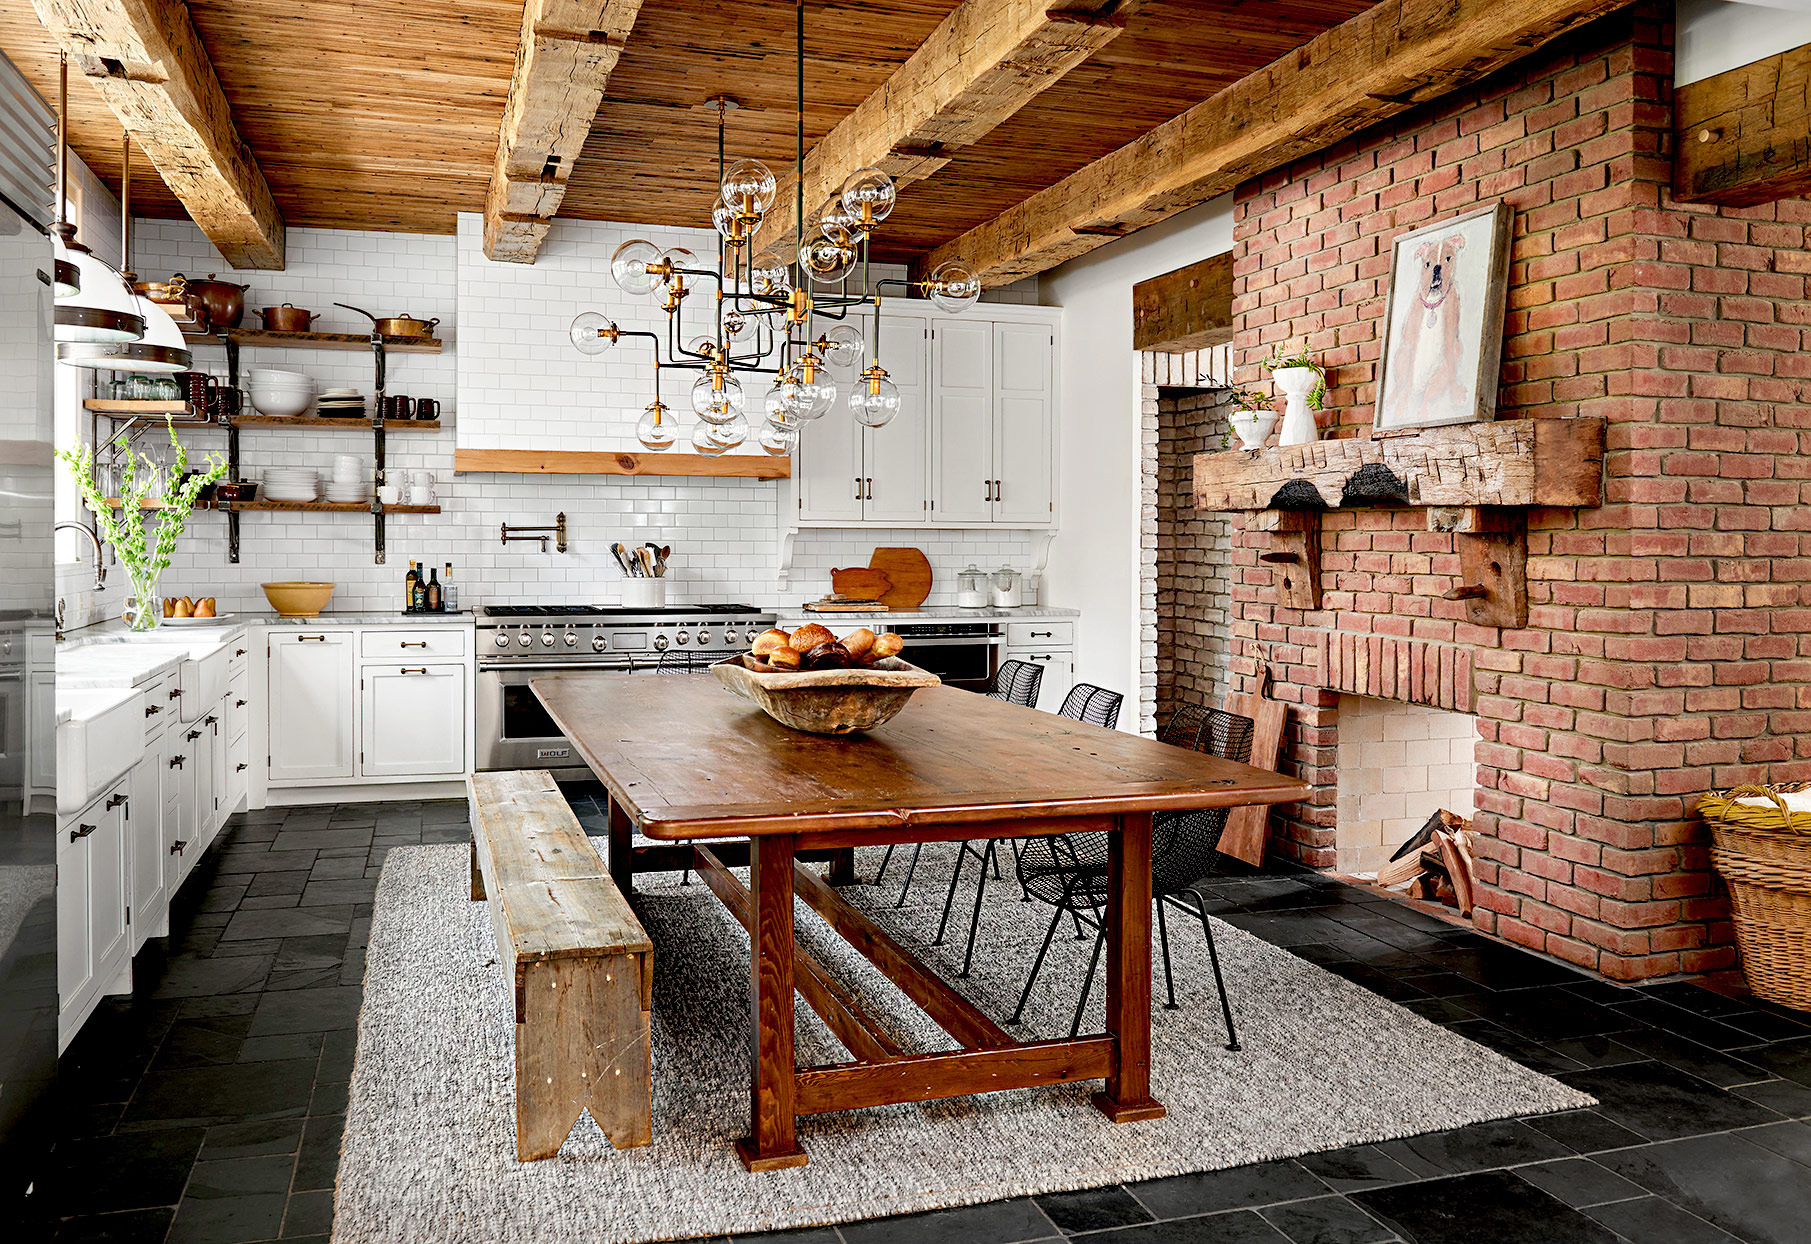 90 Design Tips and Ideas to Create the Rustic Farmhouse Kitchen of Your ...